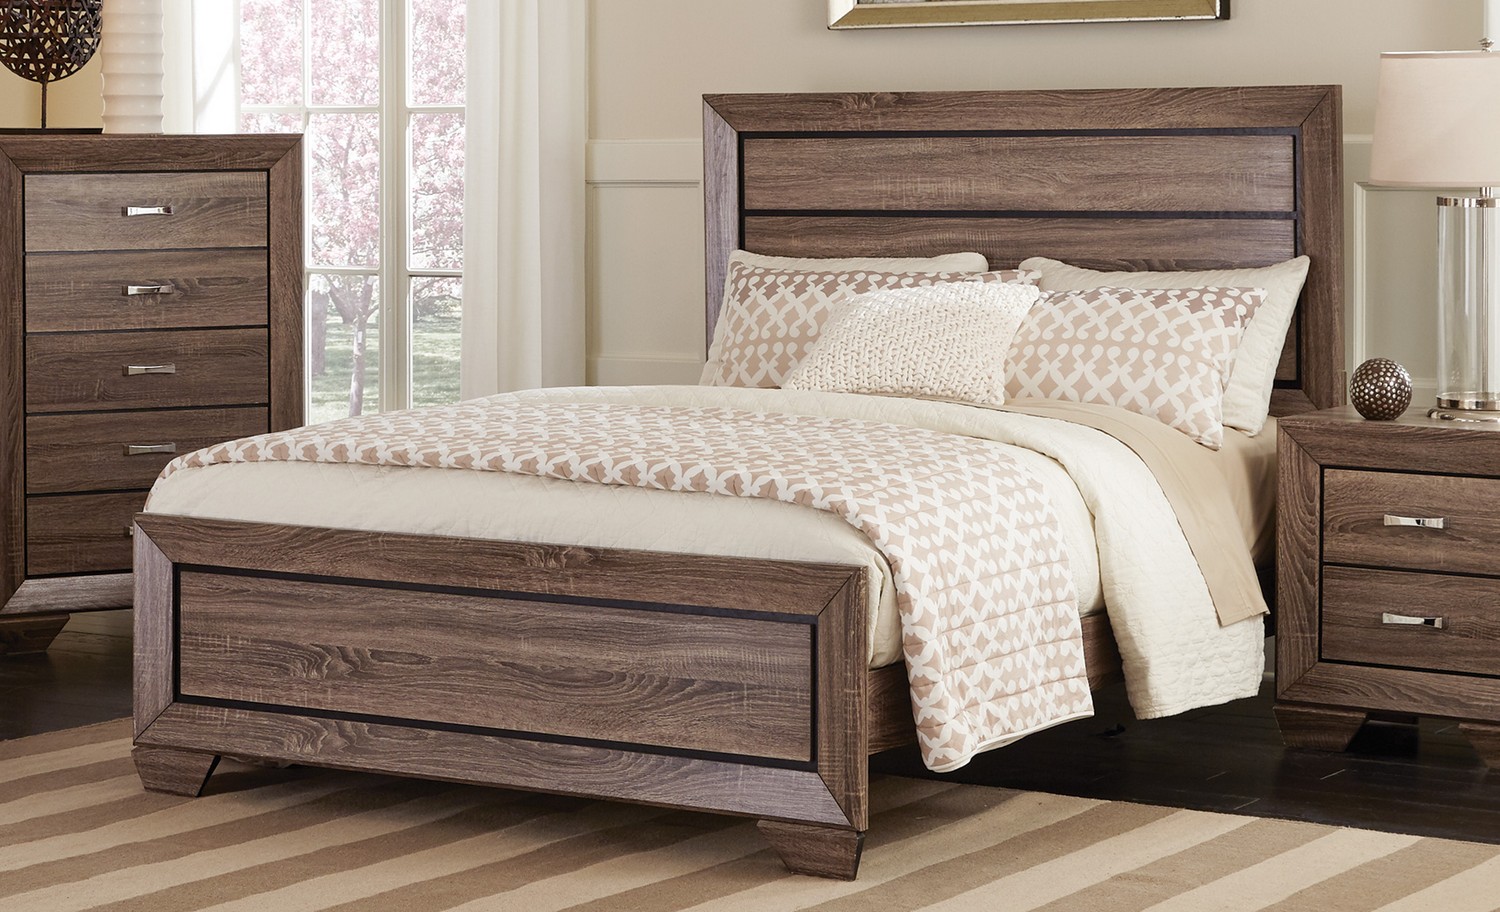 Coaster Kauffman Bed - Washed Taupe